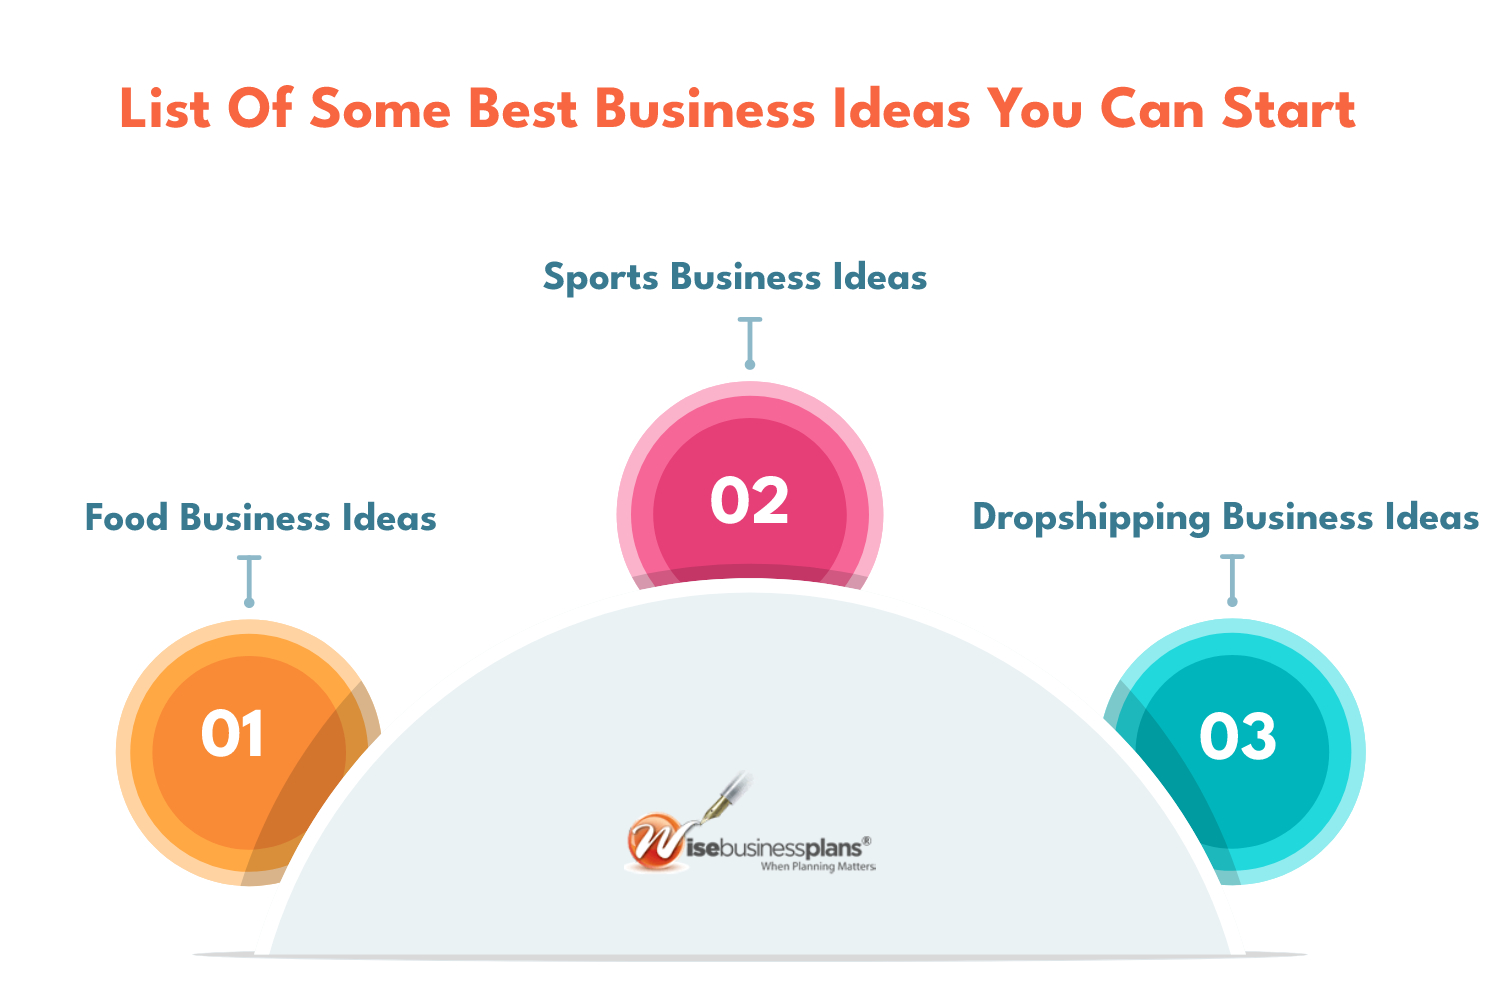 List of some best business ideas you can start